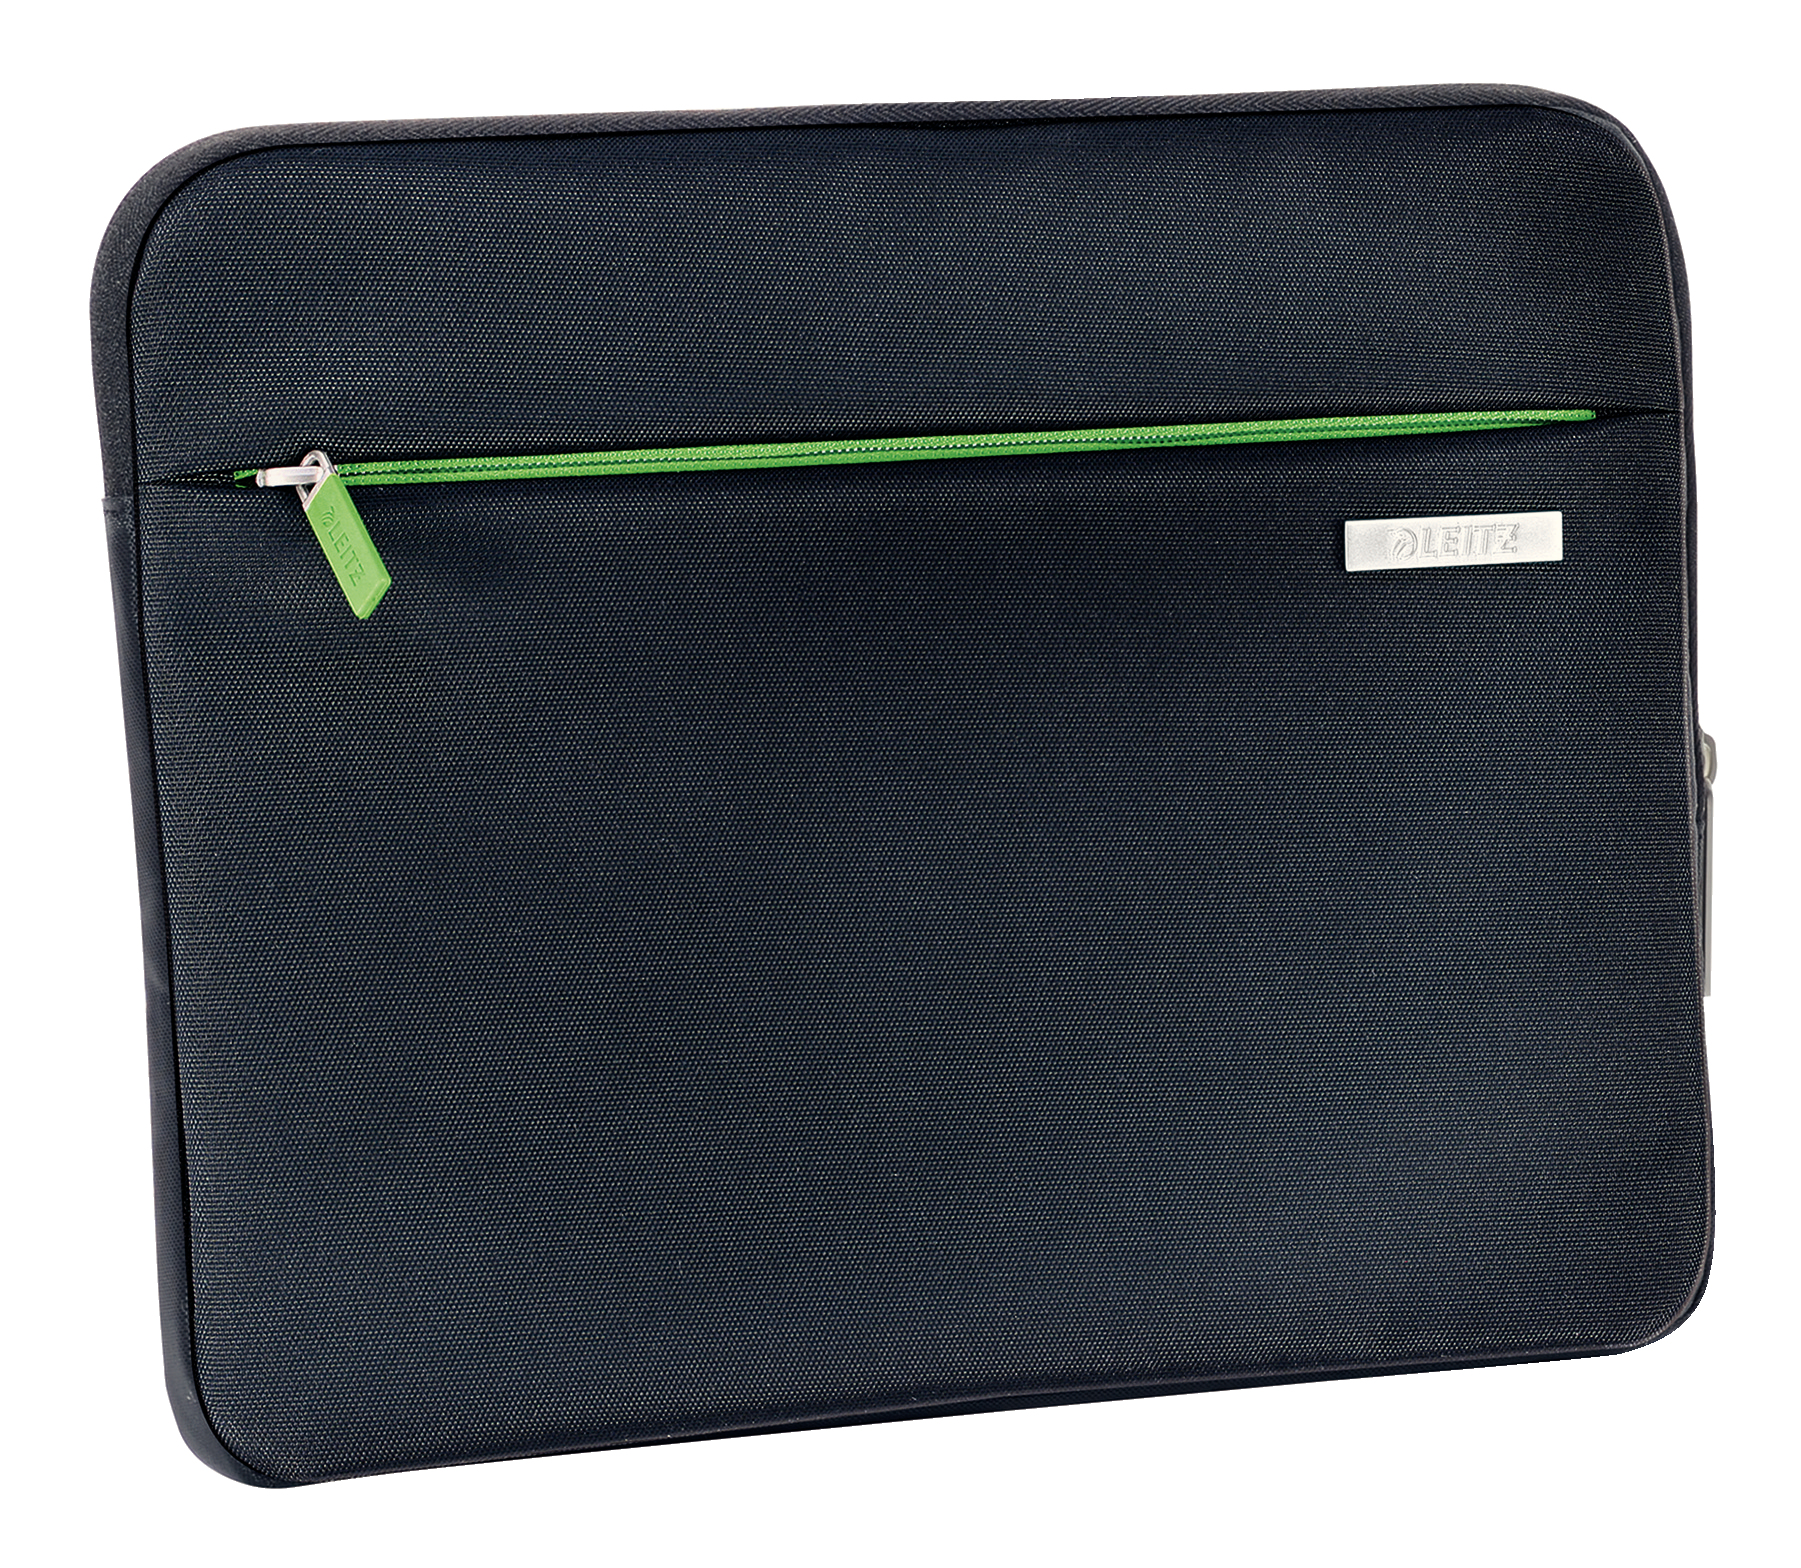 Sleeve Tablet Complete 10inch Black 62930095 - WC01